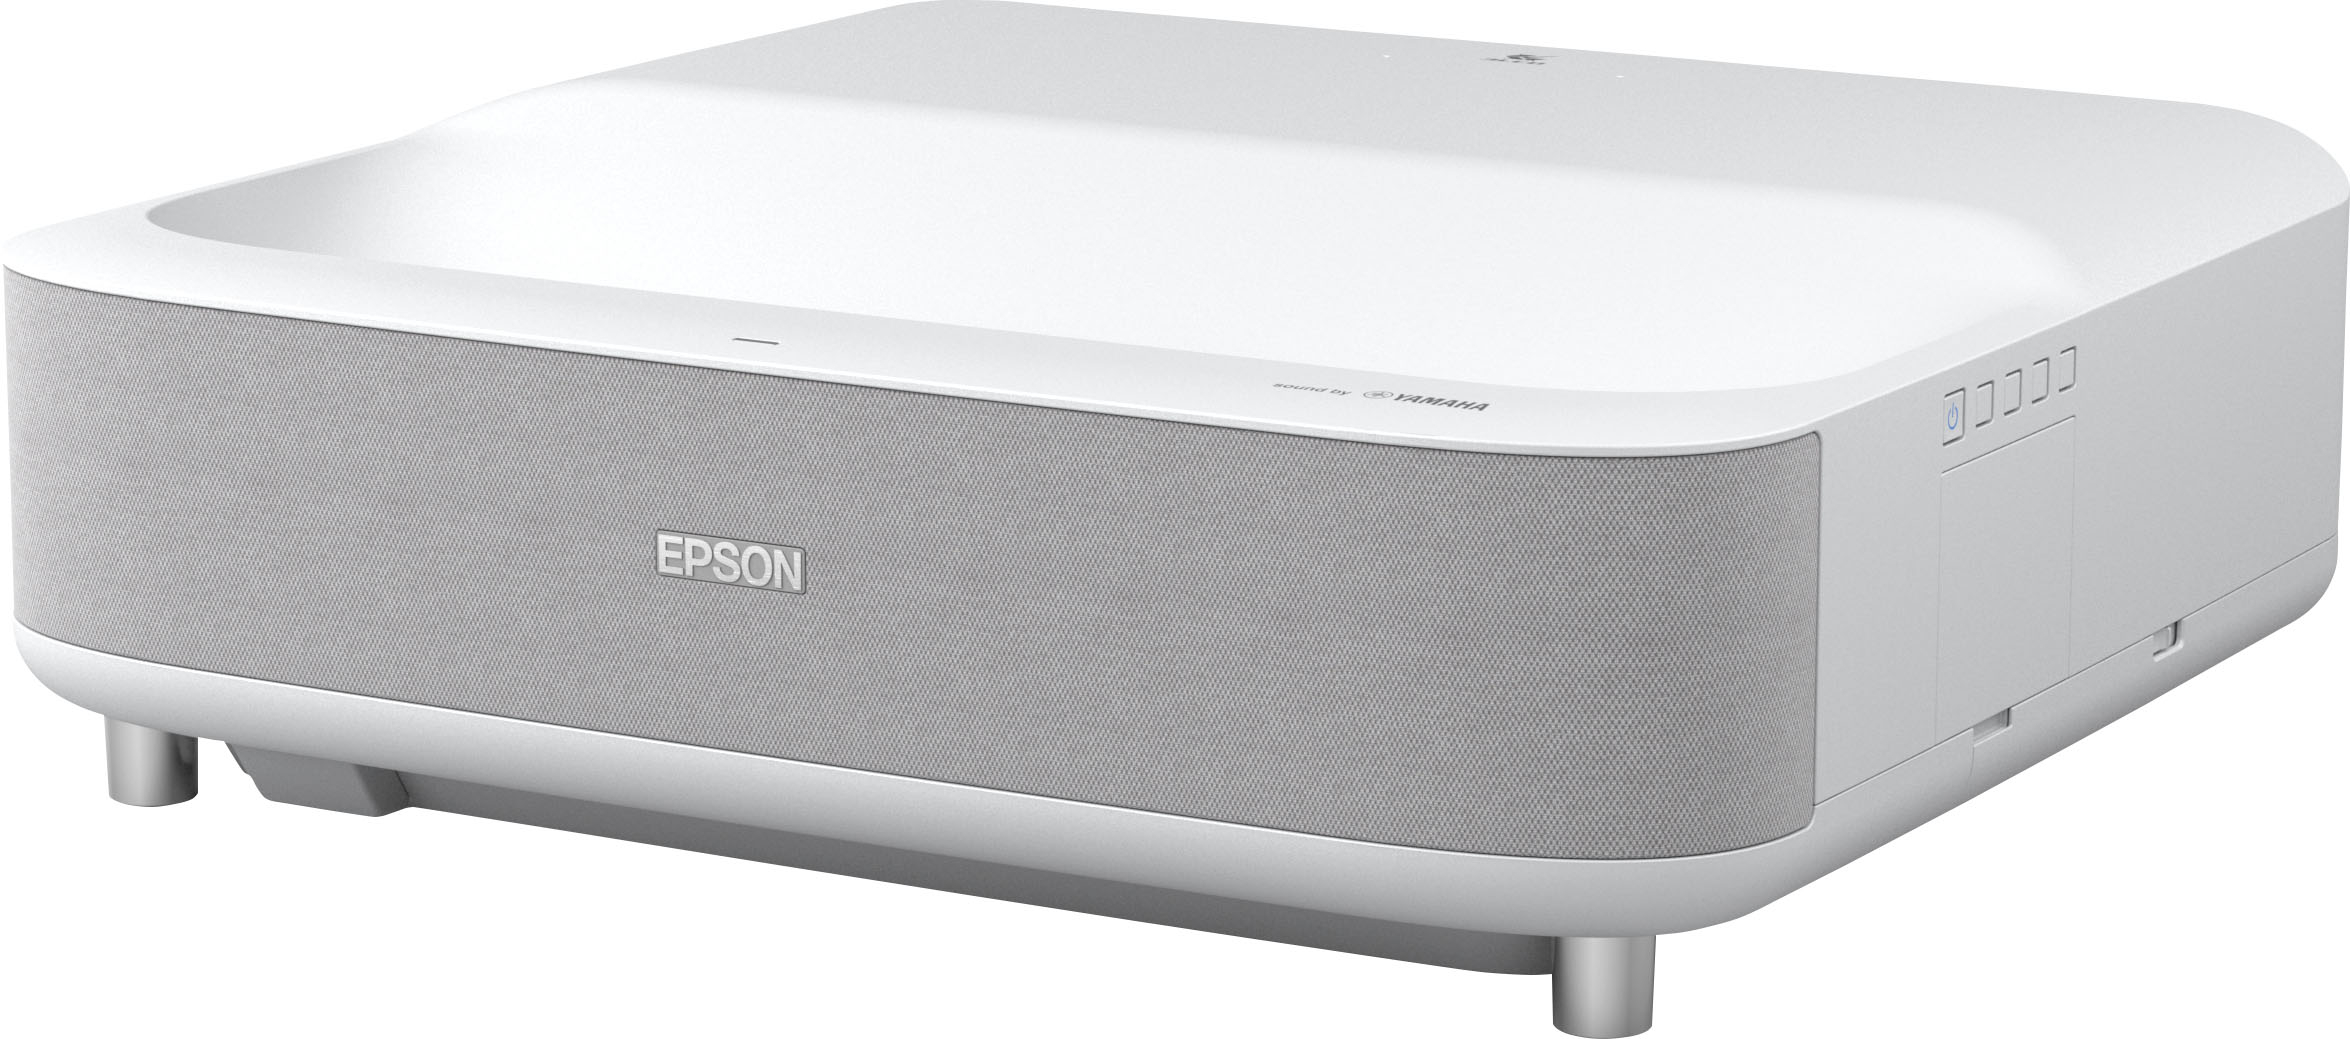 Left View: Epson - EpiqVision Ultra LS300 Smart Streaming Laser Short Throw Projector, 3600 lumens - Certified Refurbished - White